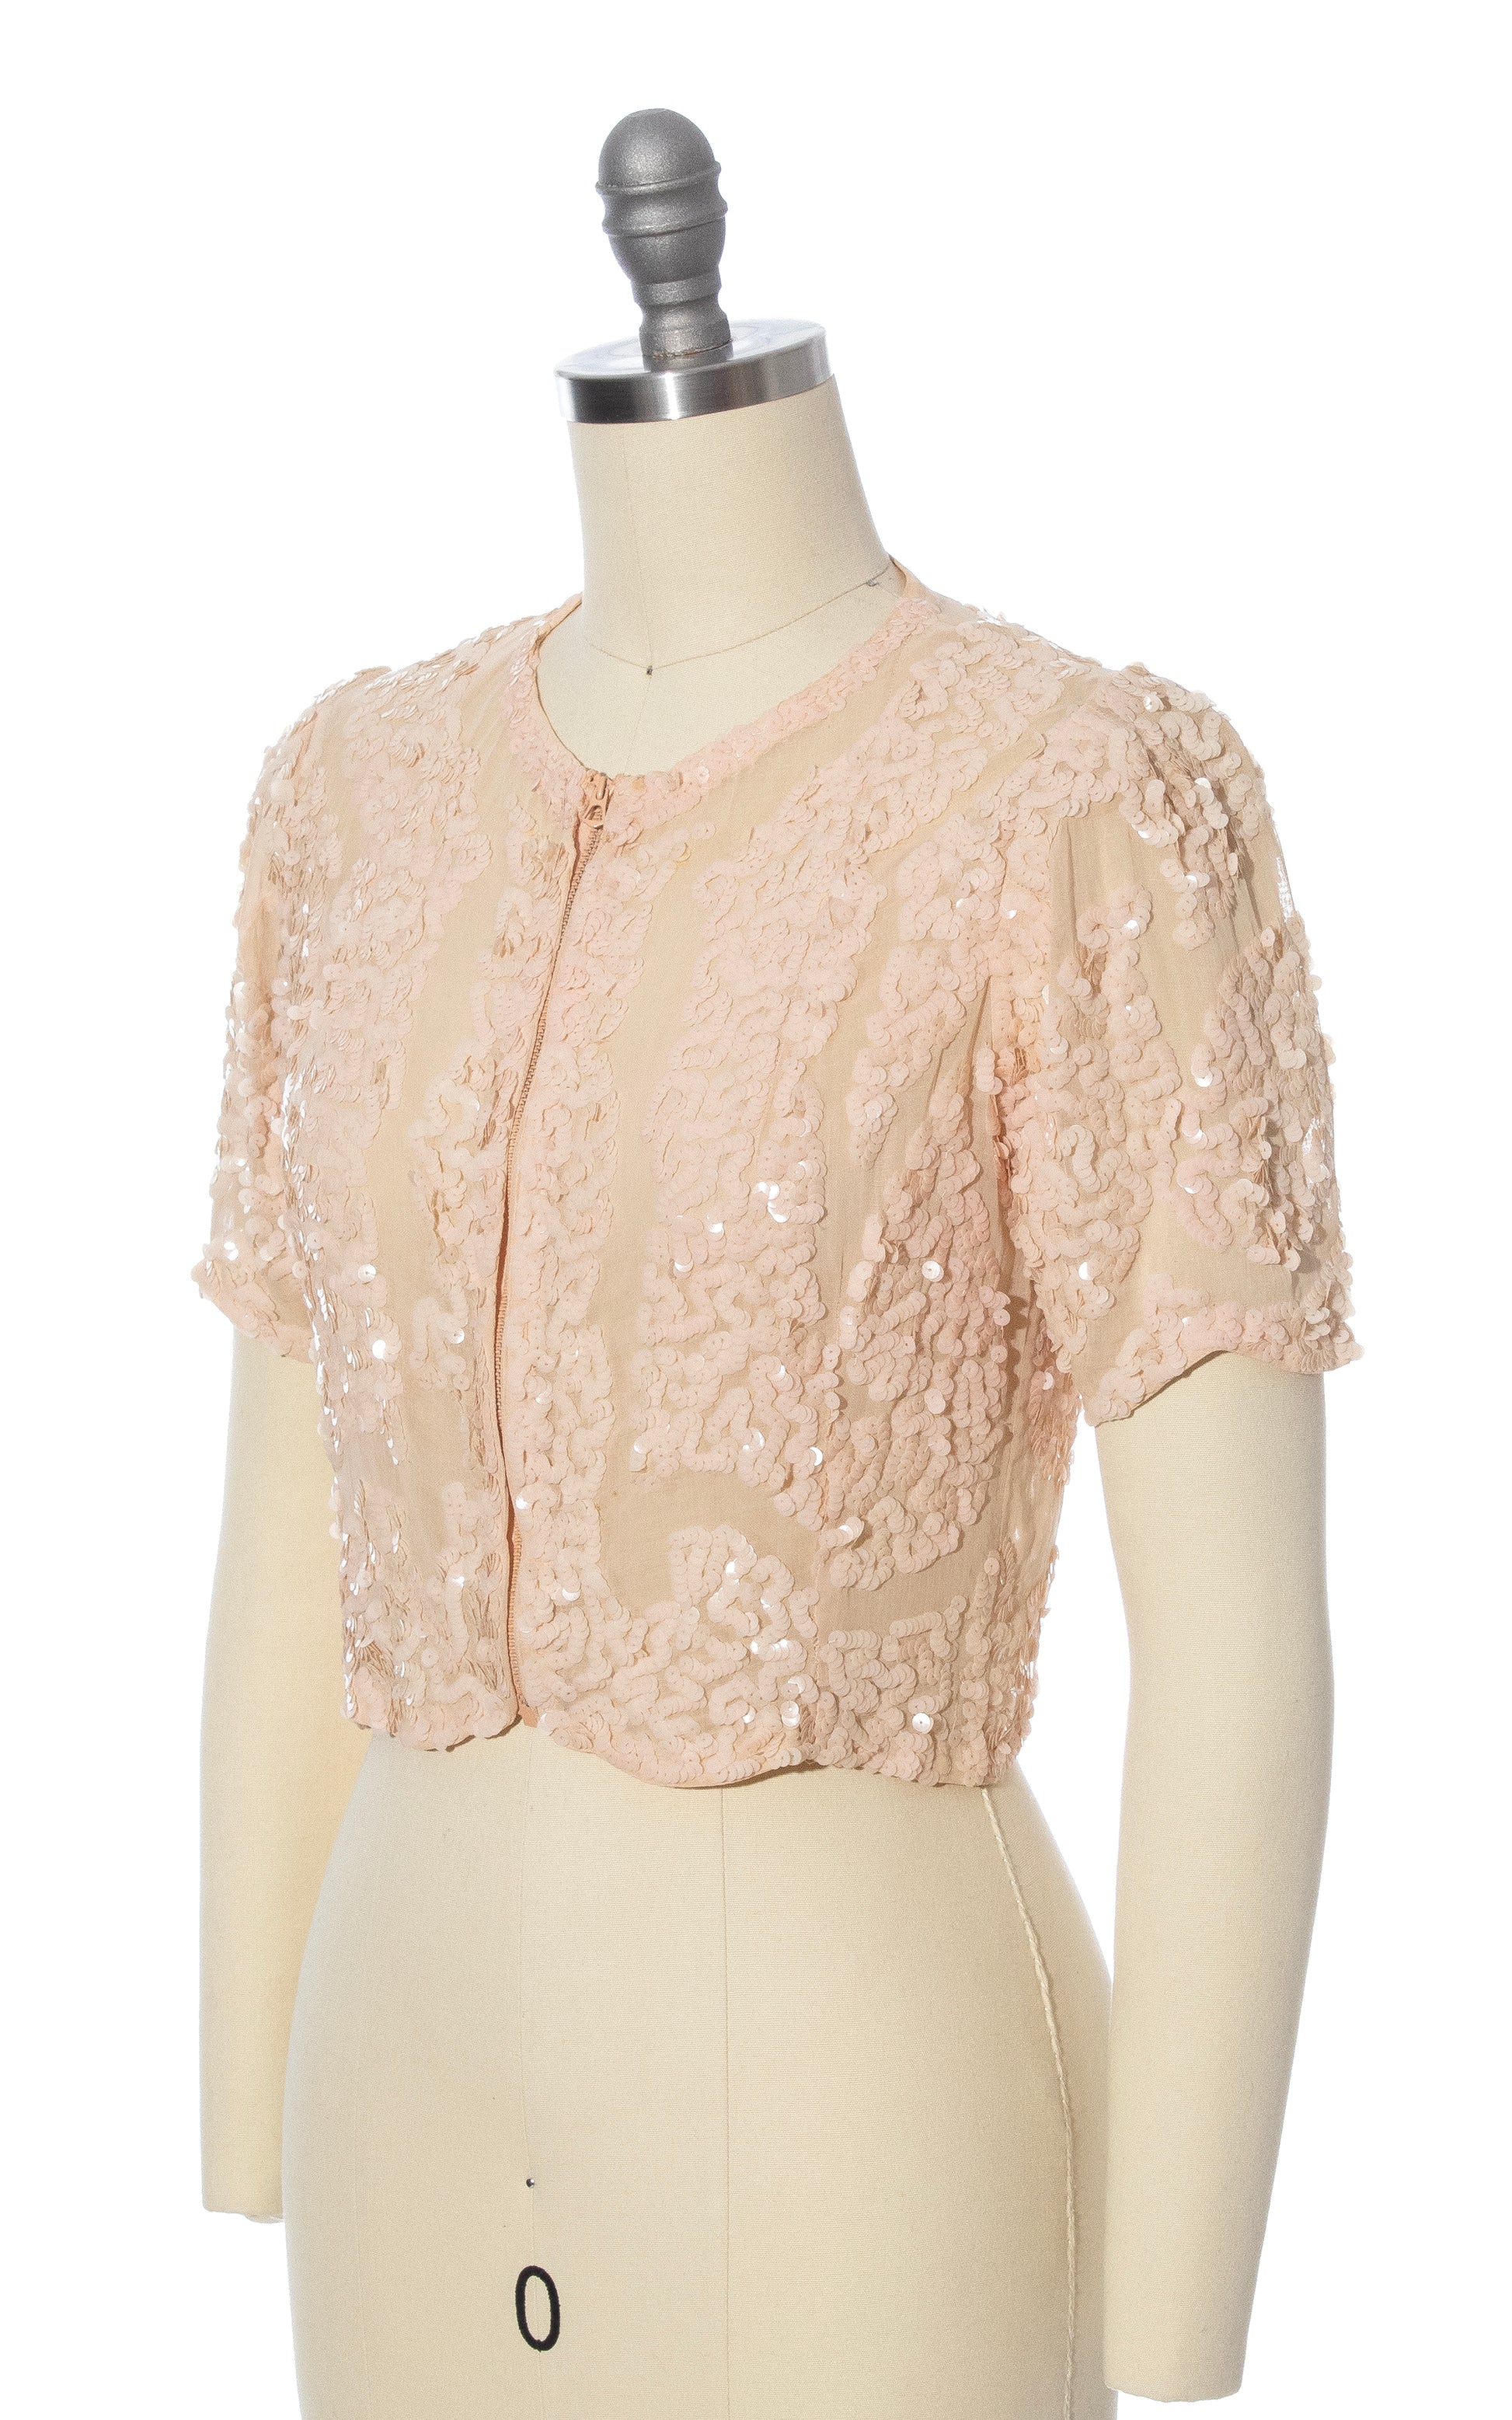 Vintage 30s 1930s Peach Sequined Scalloped Top BirthdayLifeVintage